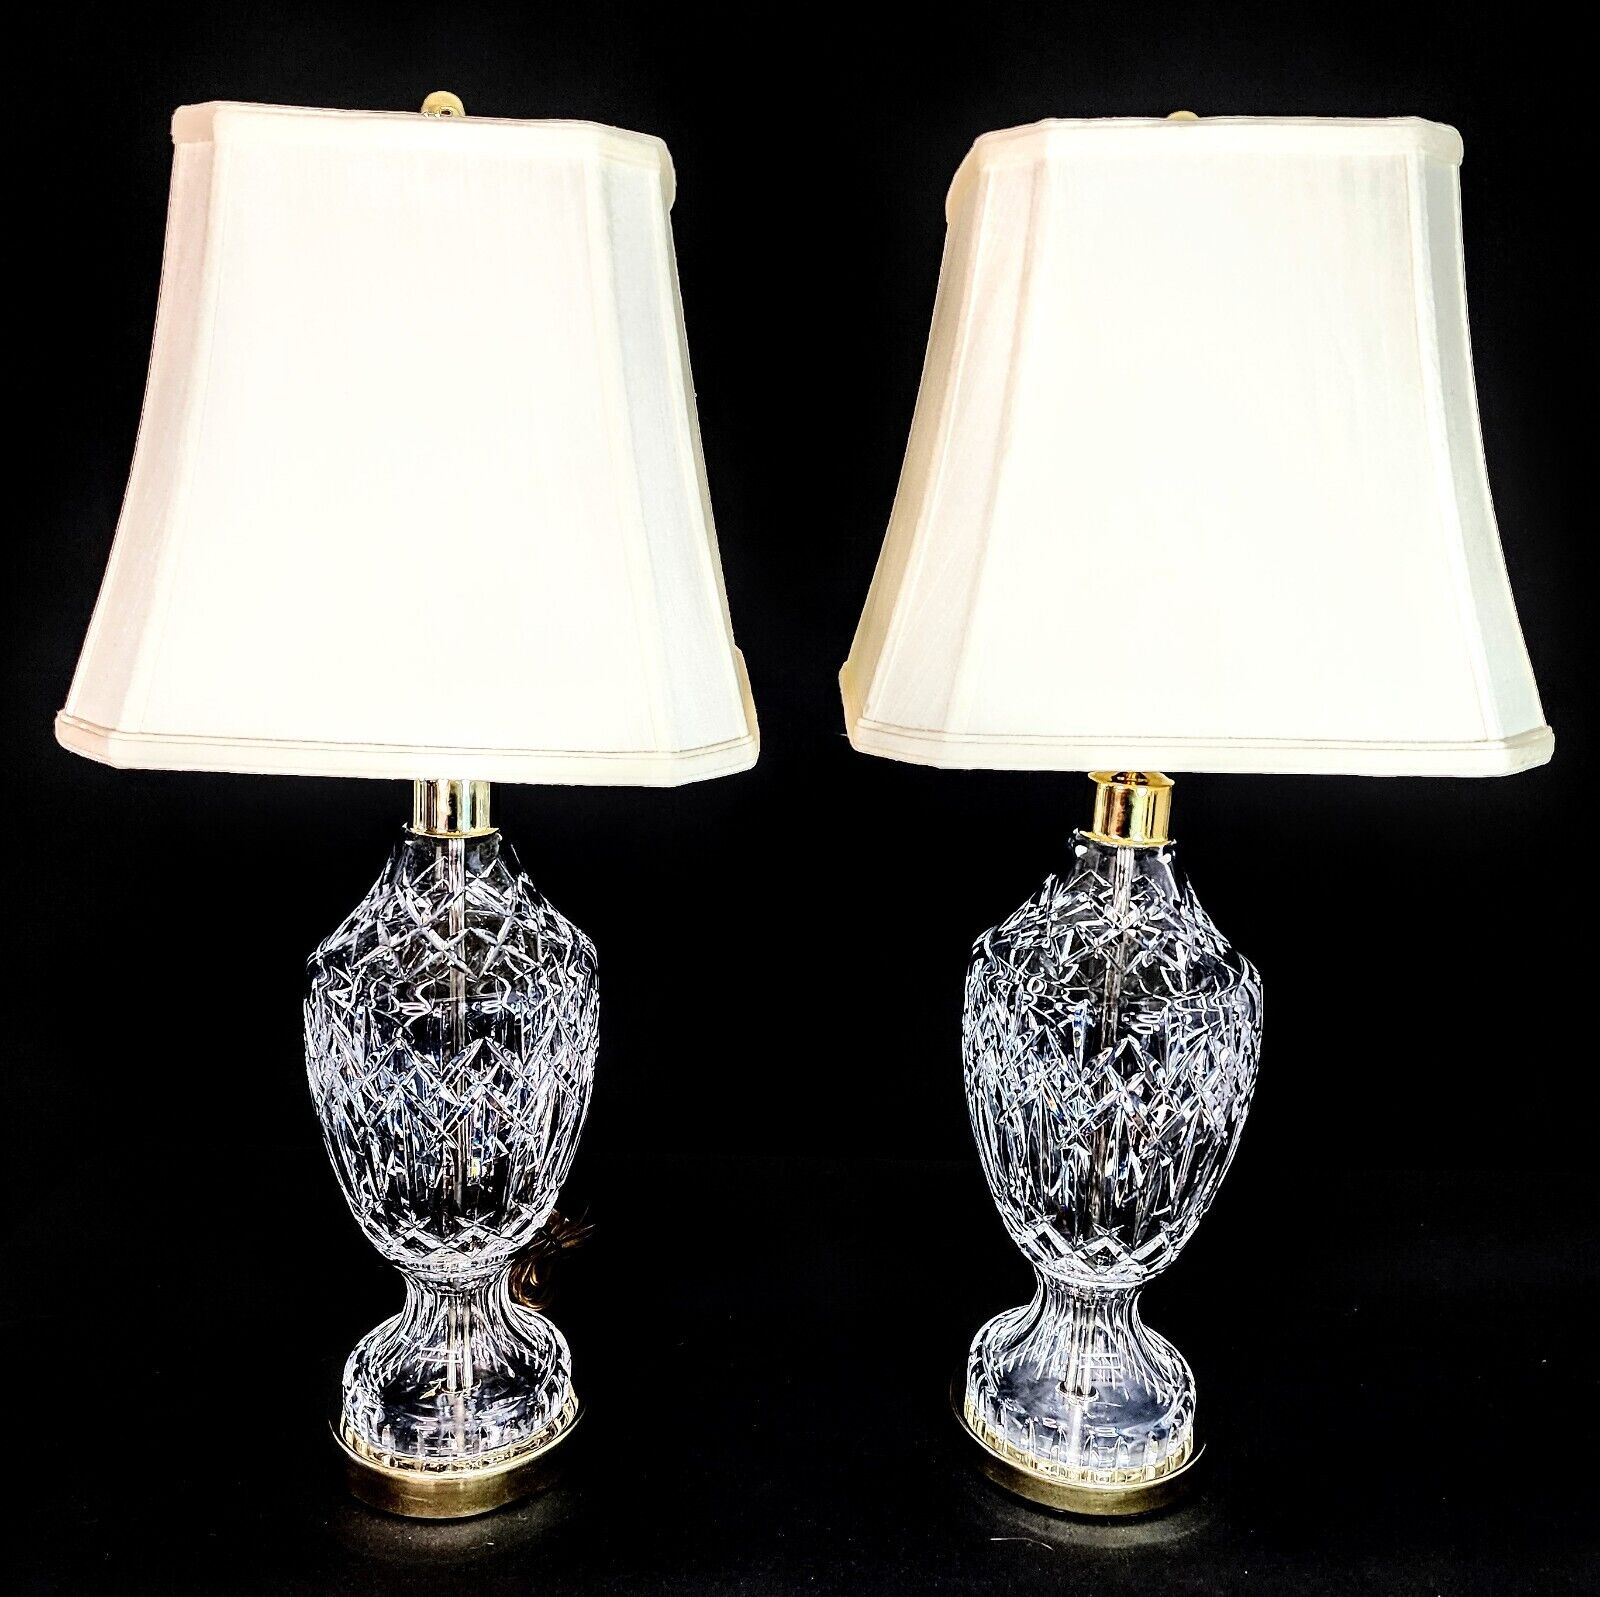 Waterford Set of 2 Model 7575 Fine Cut Crystal Urn Style Lamp - MINT NOS